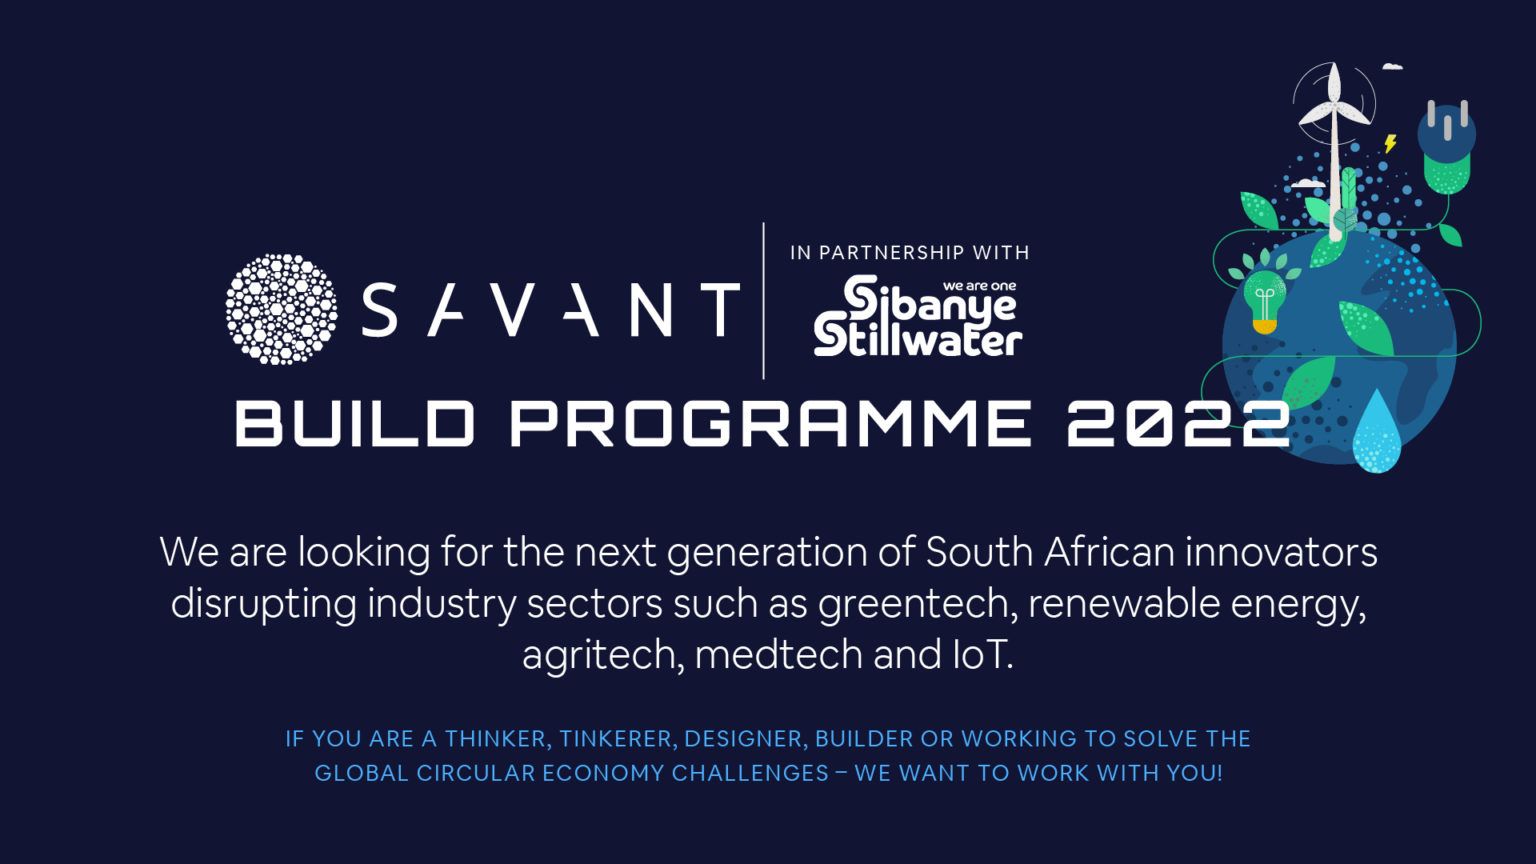 South Africa Hardware Startups Invited to Apply for Savant BUILD program